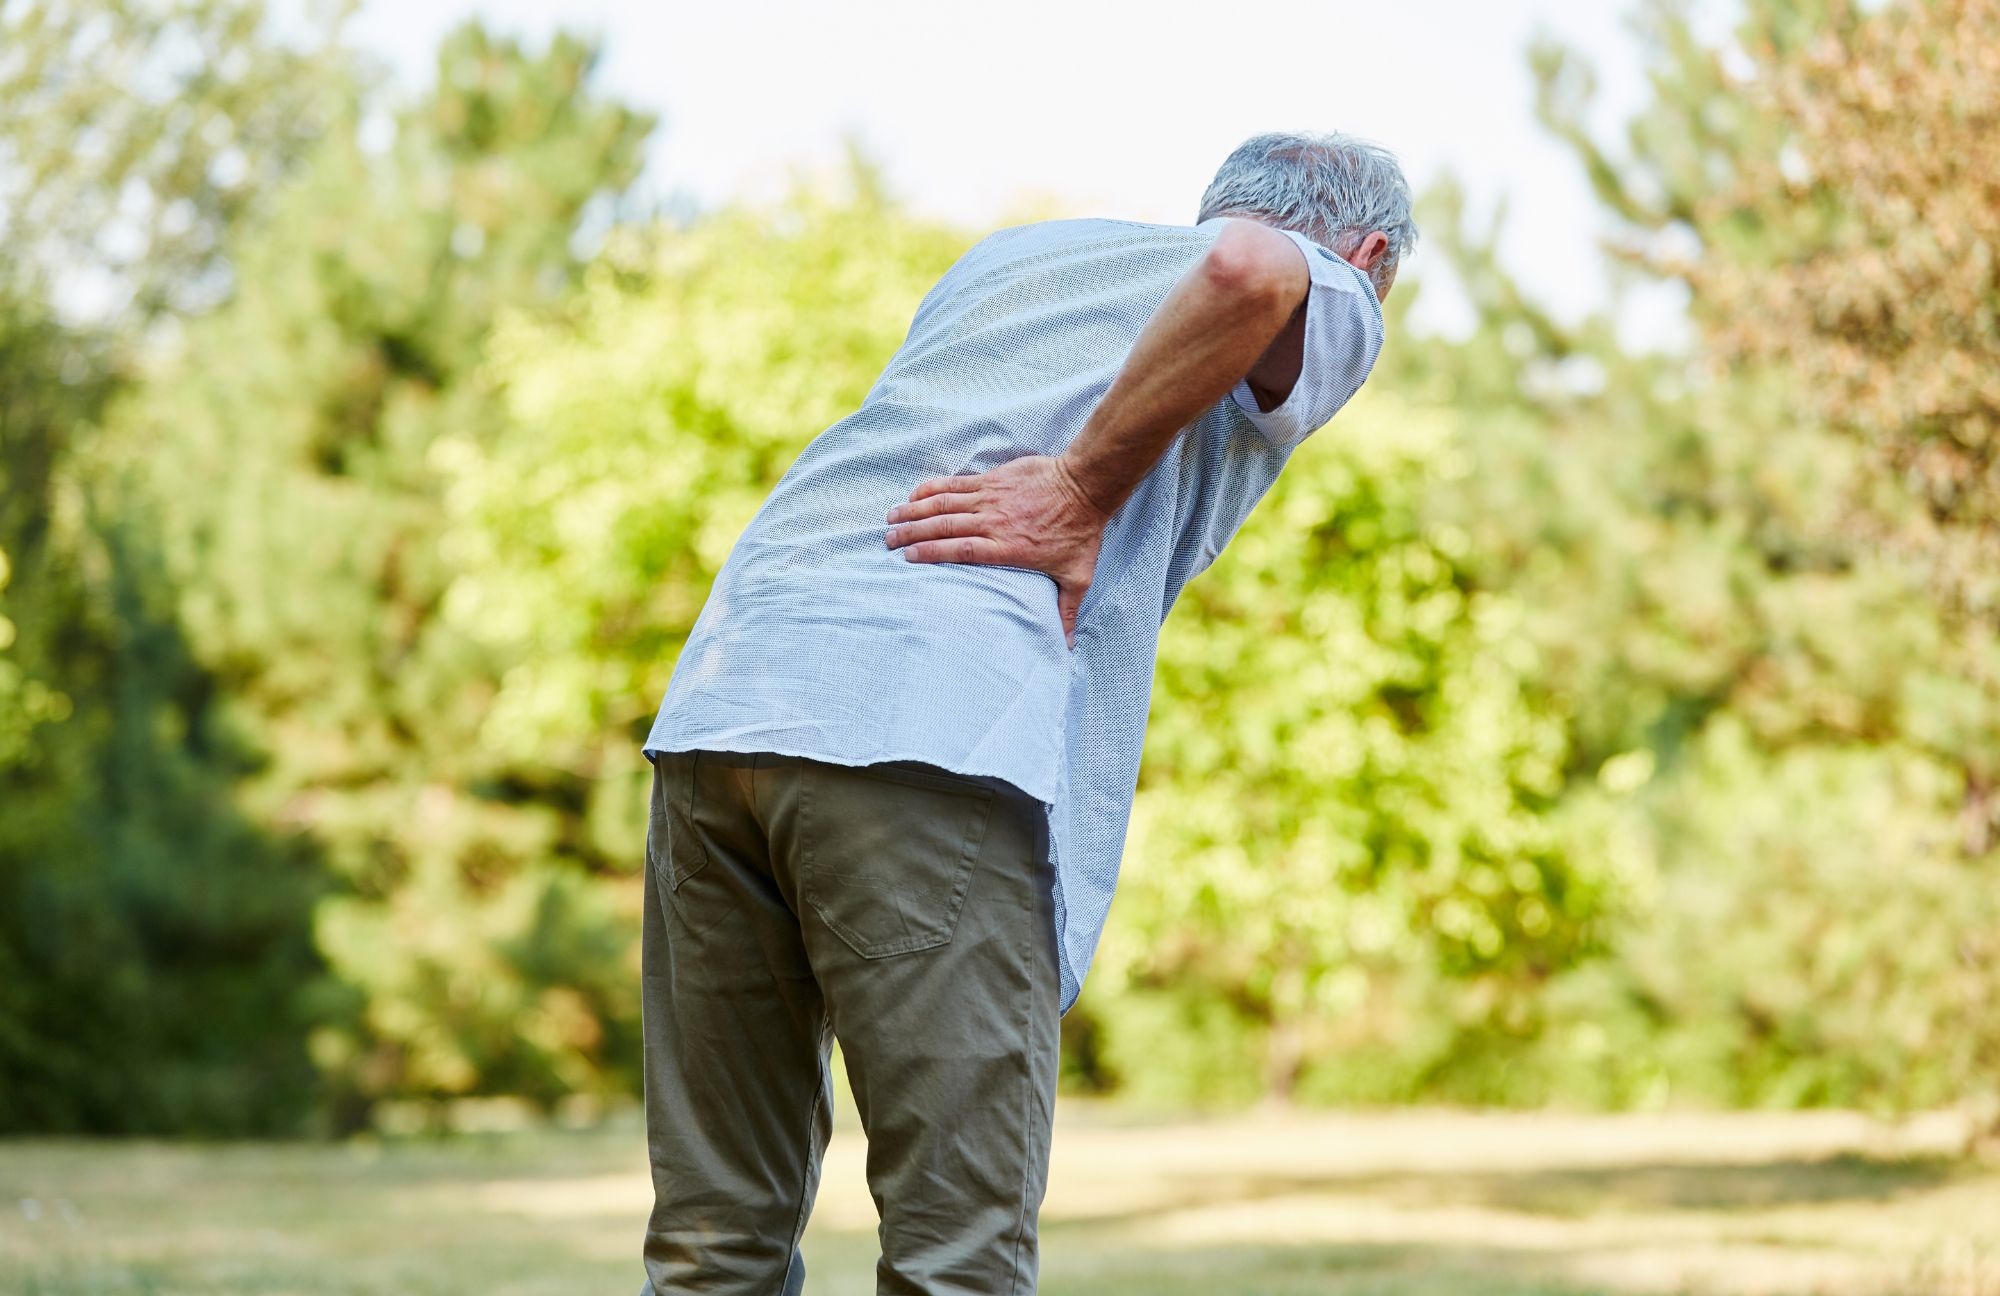 5 Amazing Stretches for Lower Back Pain for Immediate Pain Relief so You Can Get Back to Gardening, Walks in the Park, and Time With Grandkids